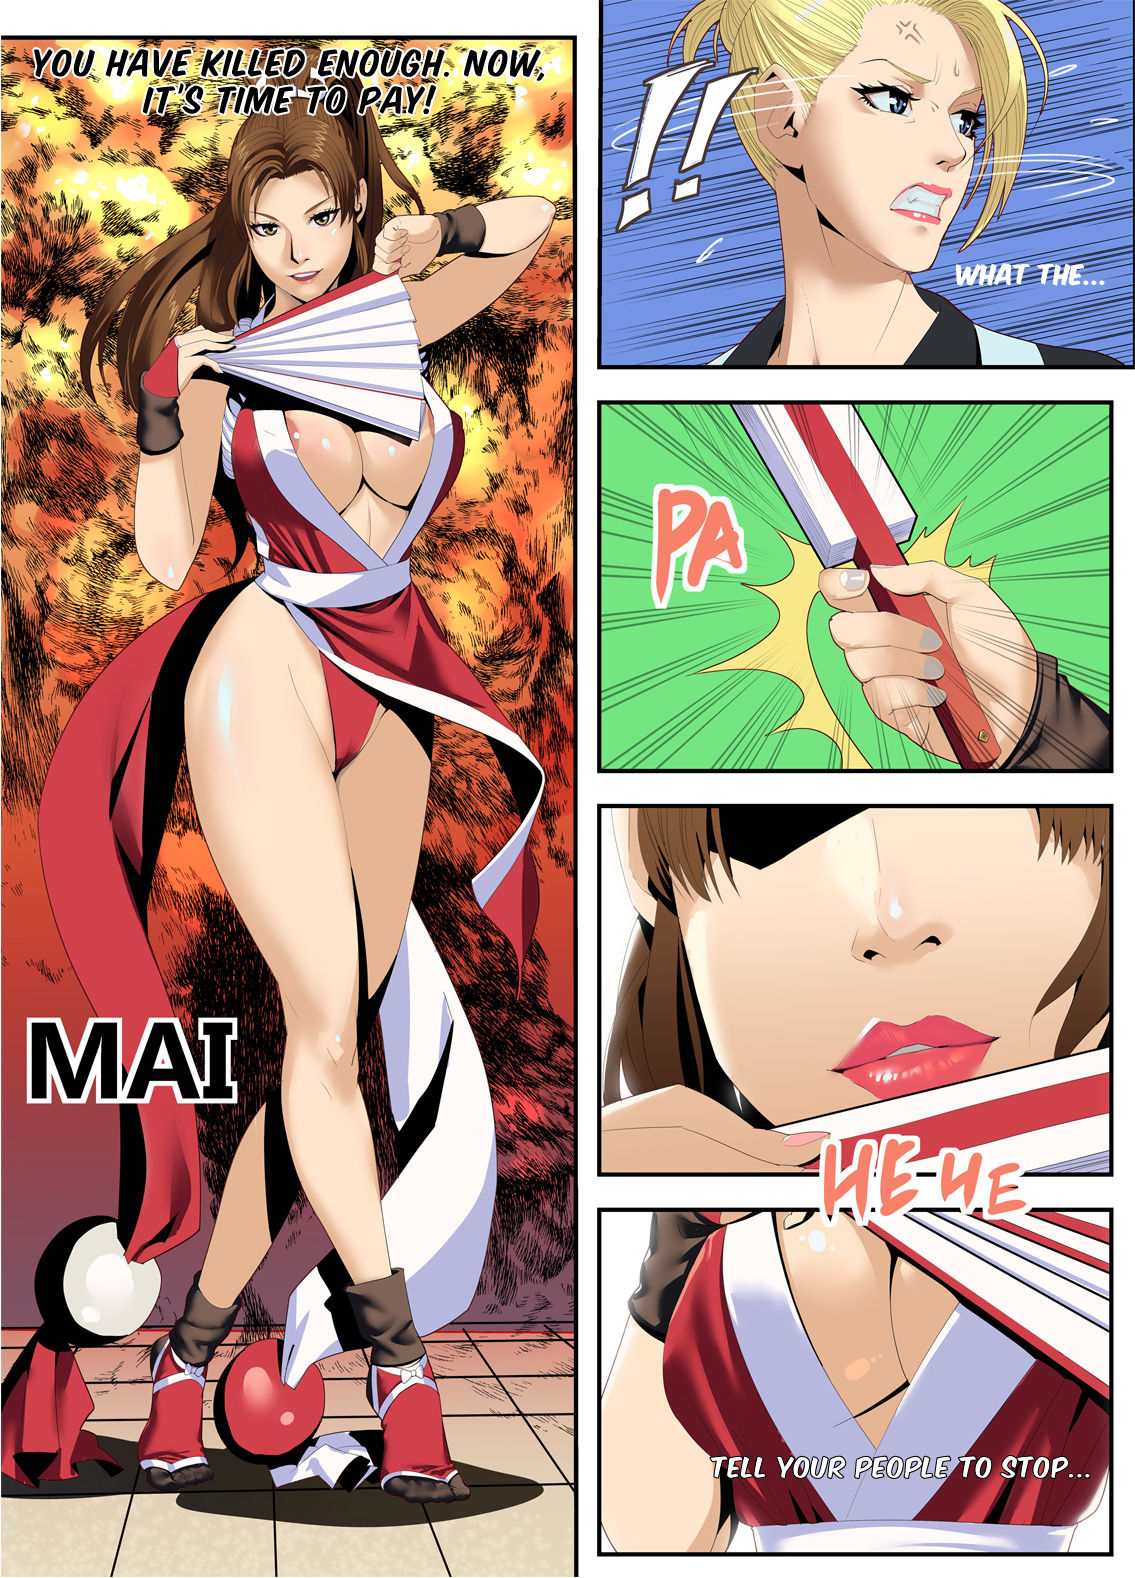 [chunlieater] The Lust of Mai Shiranui (King of Fighters) [English] [Yorkchoi & Twist] page 5 full